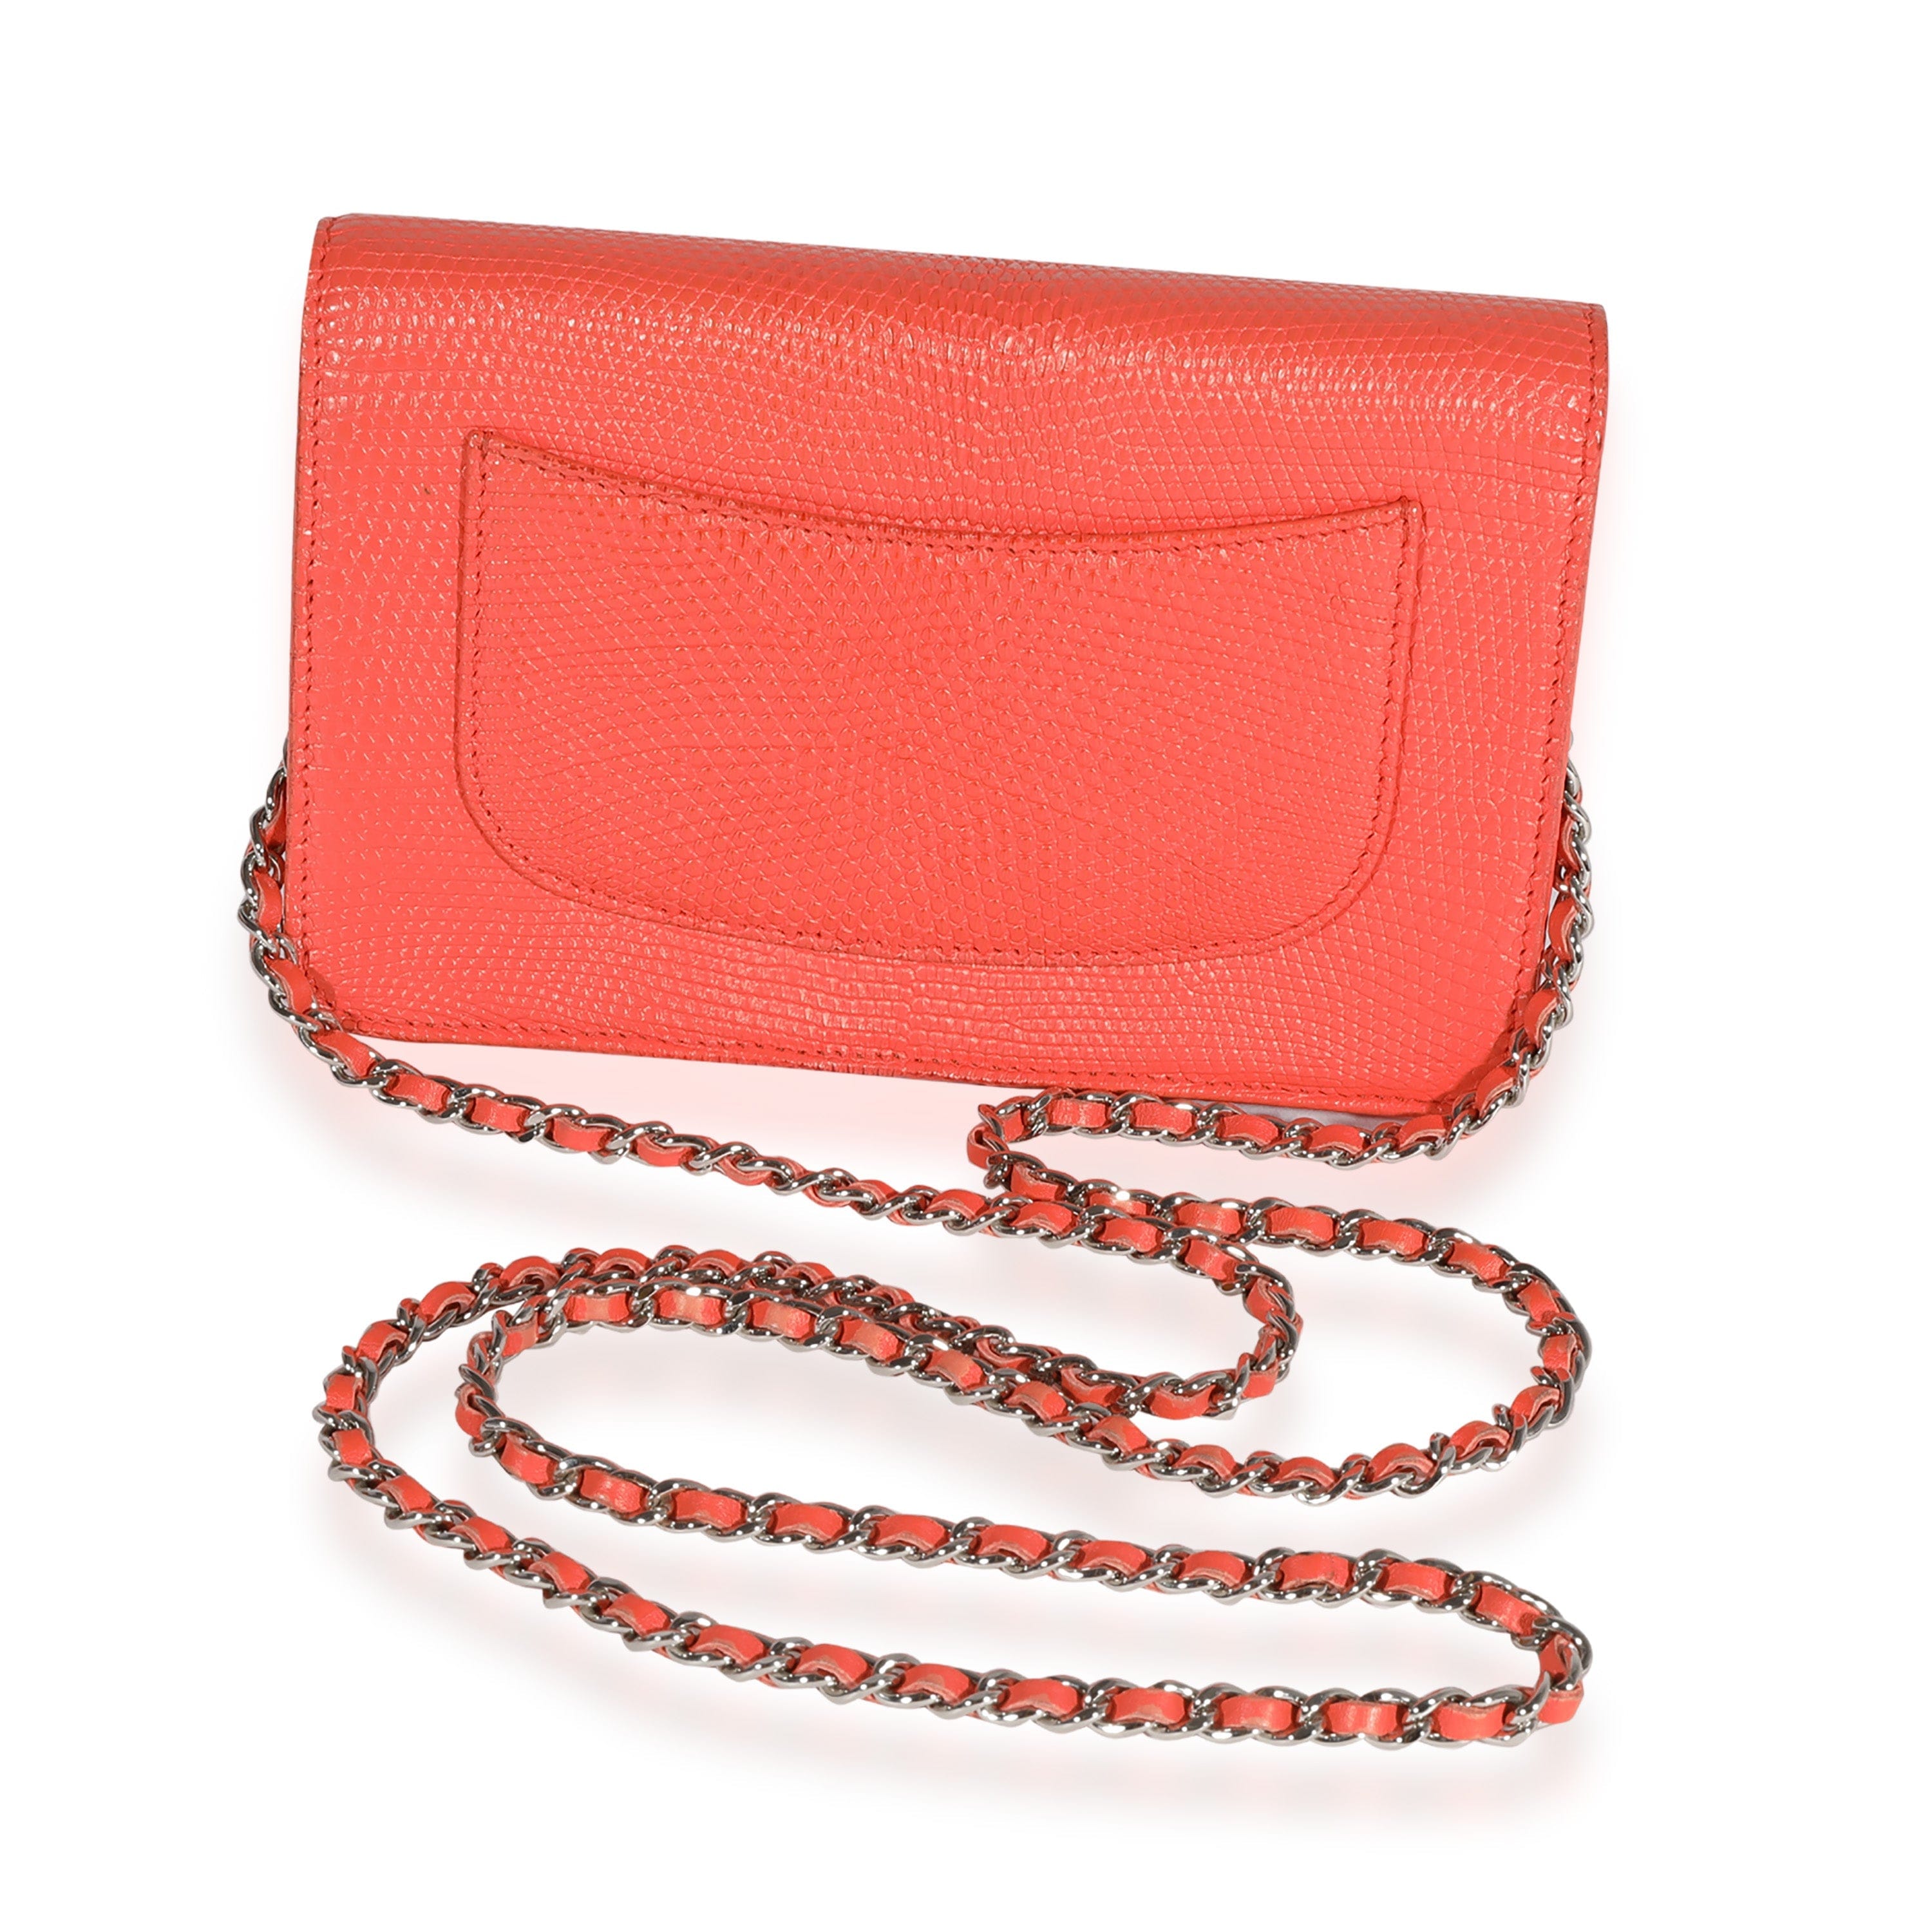 Chanel Chanel Coral Lizard Wallet On Chain